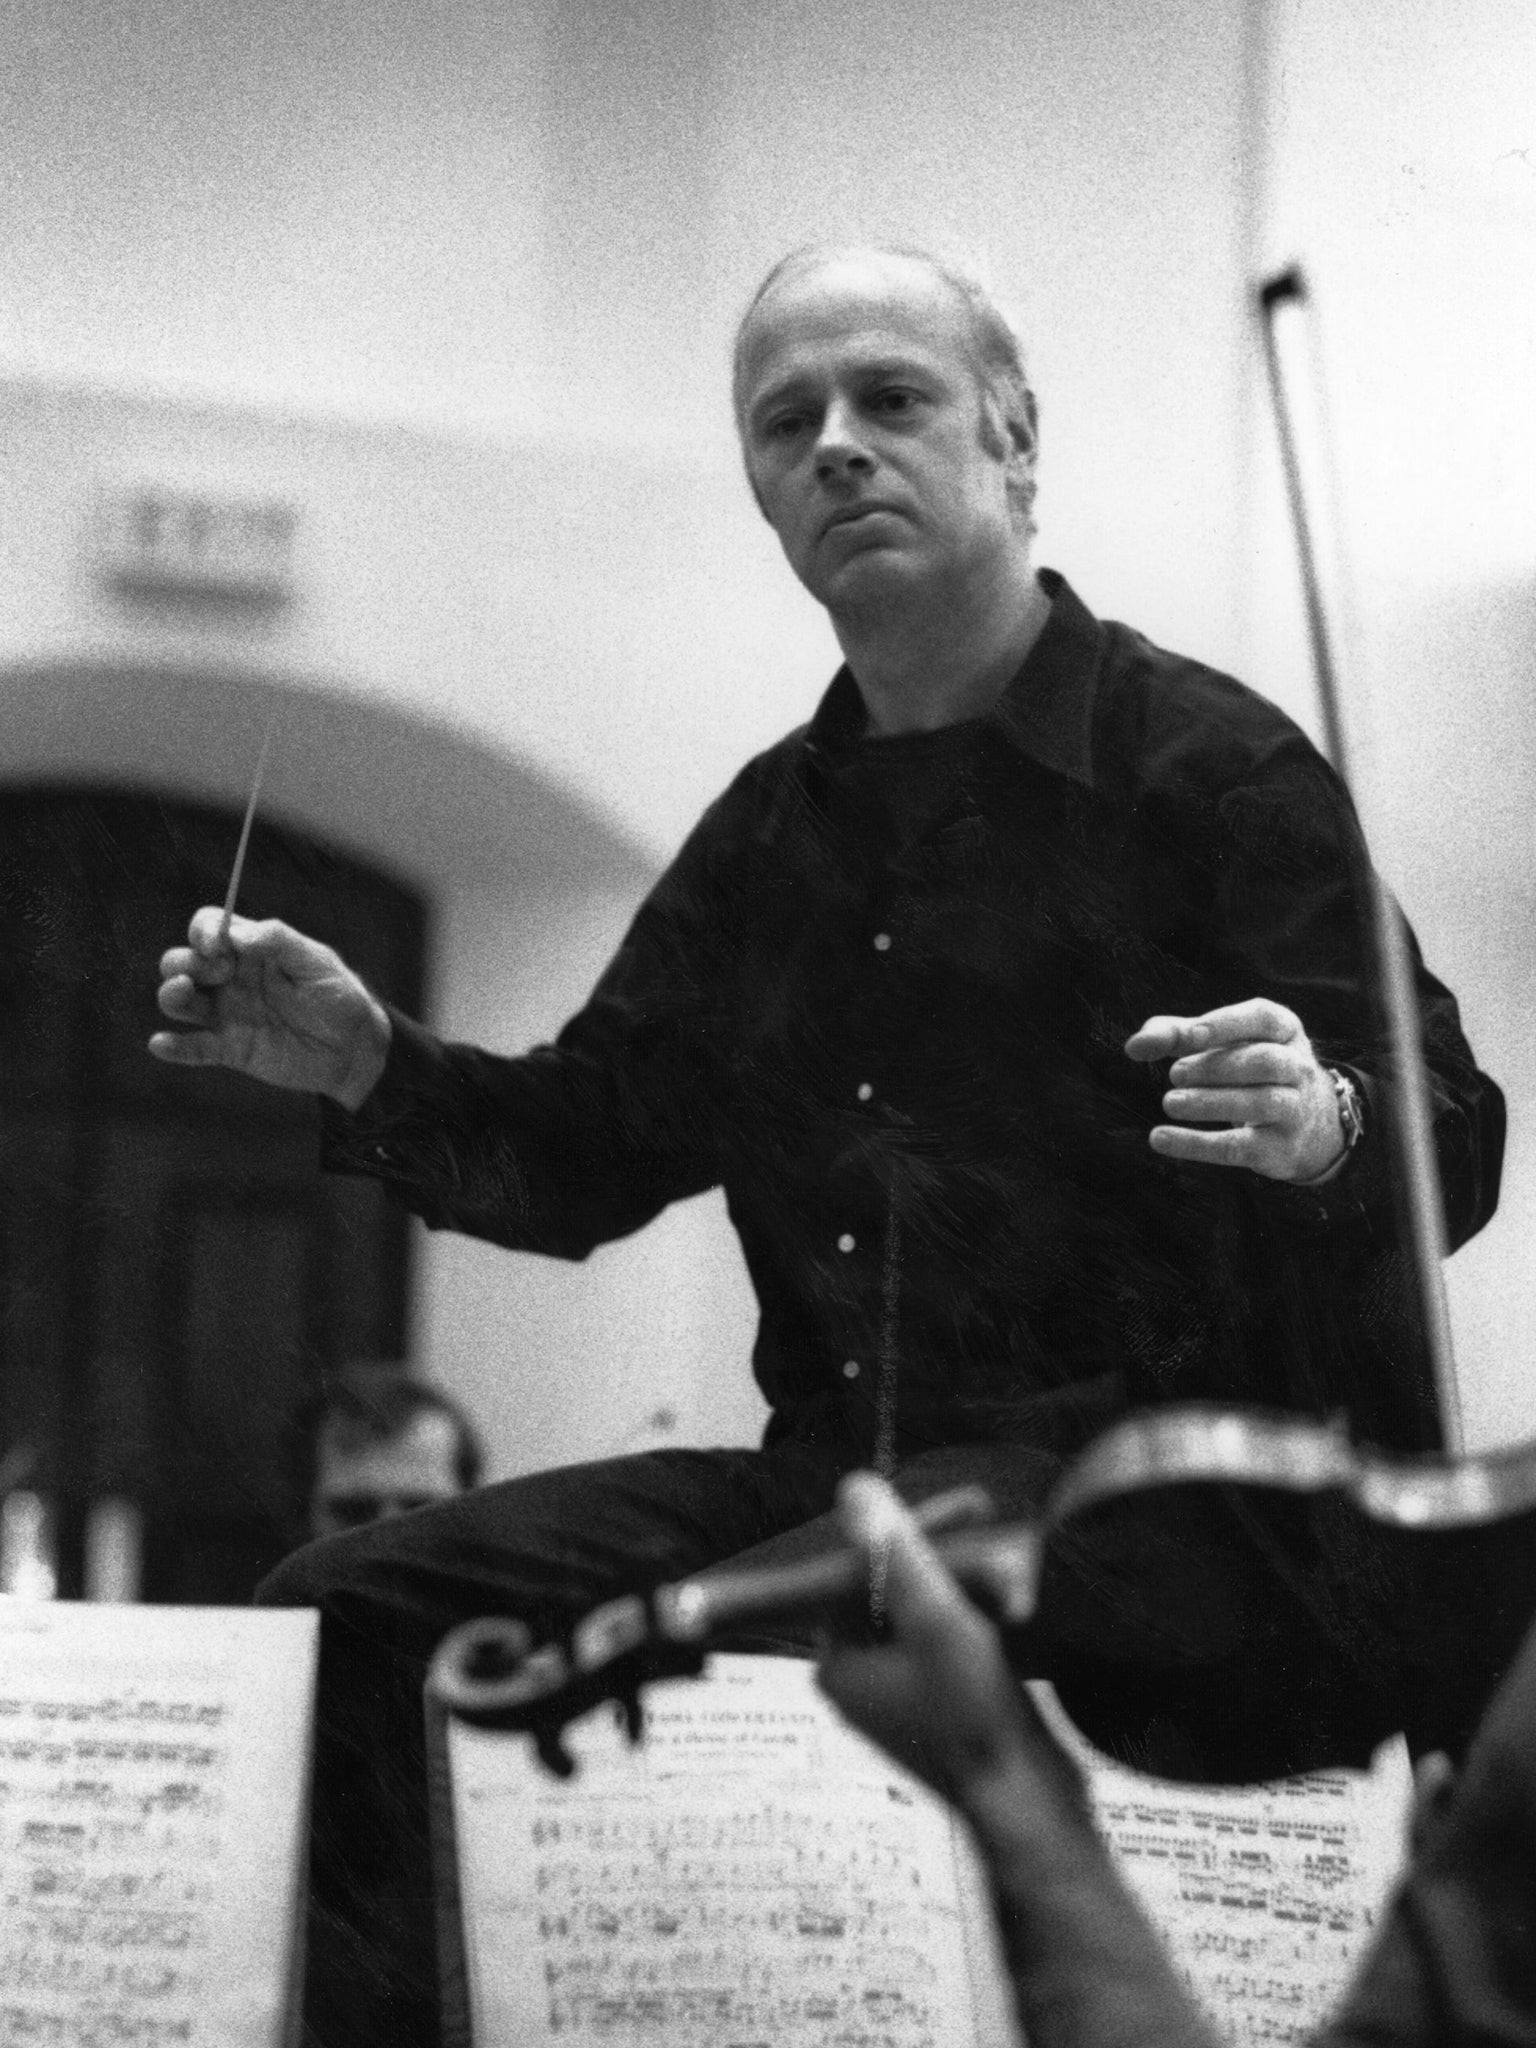 Haitink rose to principal conductor at the Concertgebouw in his early thirties